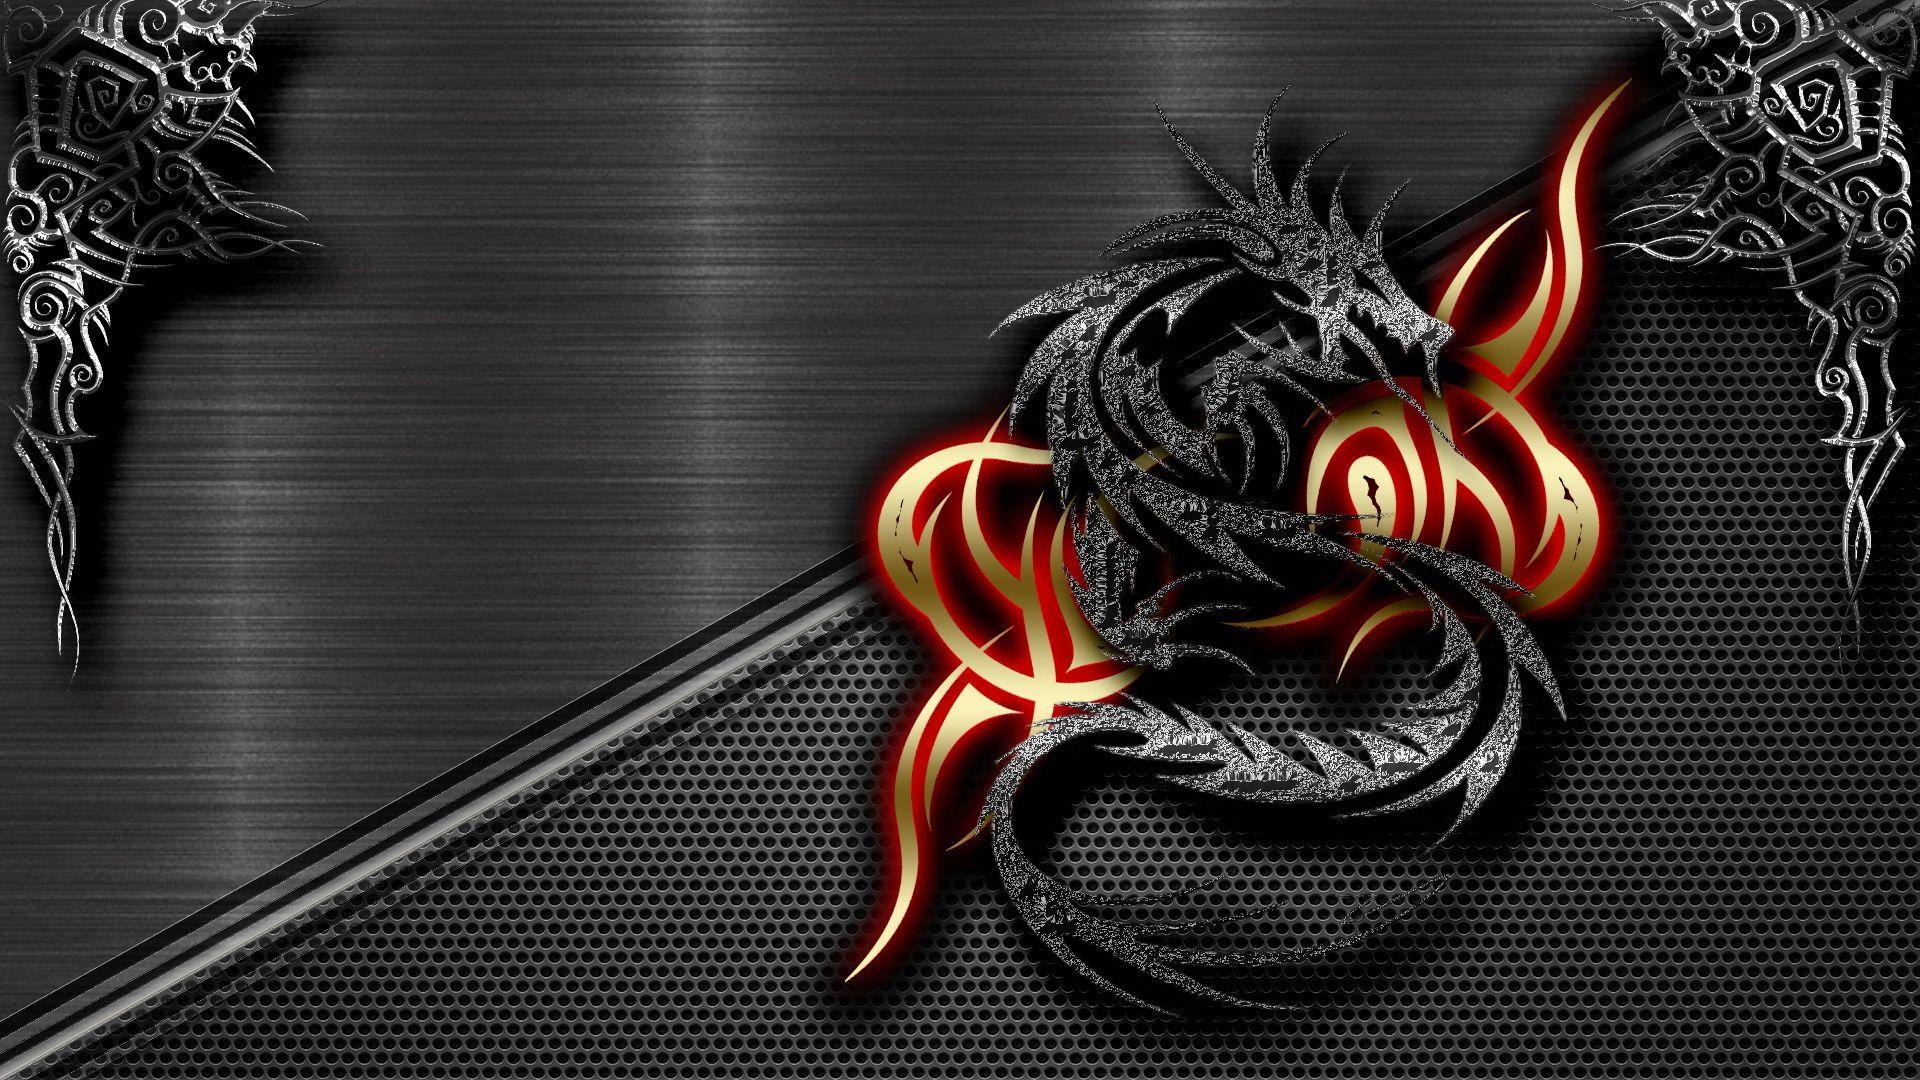 MSI Gaming Wallpaper 4K, Dragon, Fire, Red background